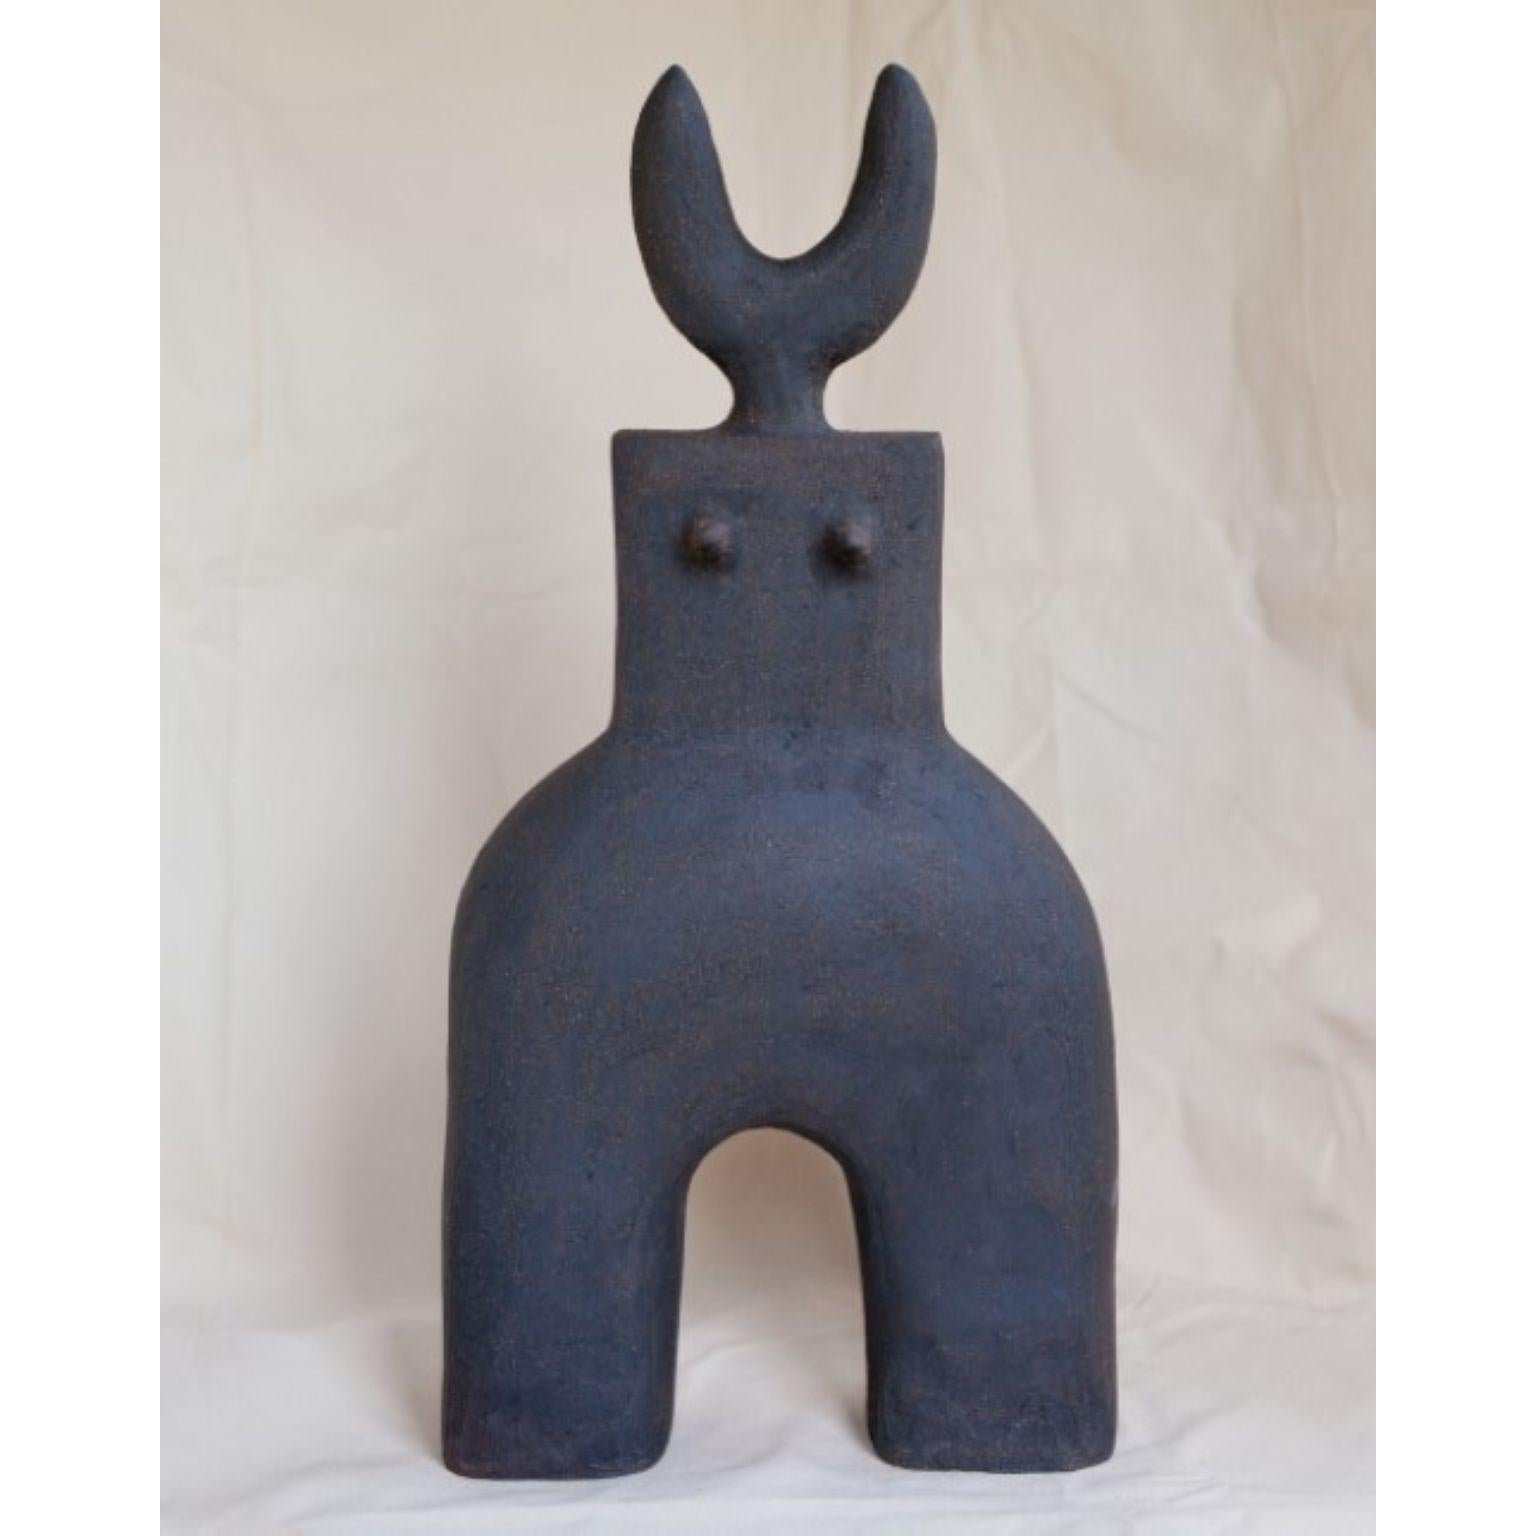 Haniwa Warrior 11 Sculpture by Noe Kuremoto
Materials: Black stoneware sculpture
Dimensions: D11 x W31 x H65 cm 

My interpretation of ancient clay figurine Haniwa.*
For years I was afraid to become an artist.
Afraid to voice my honest view of the